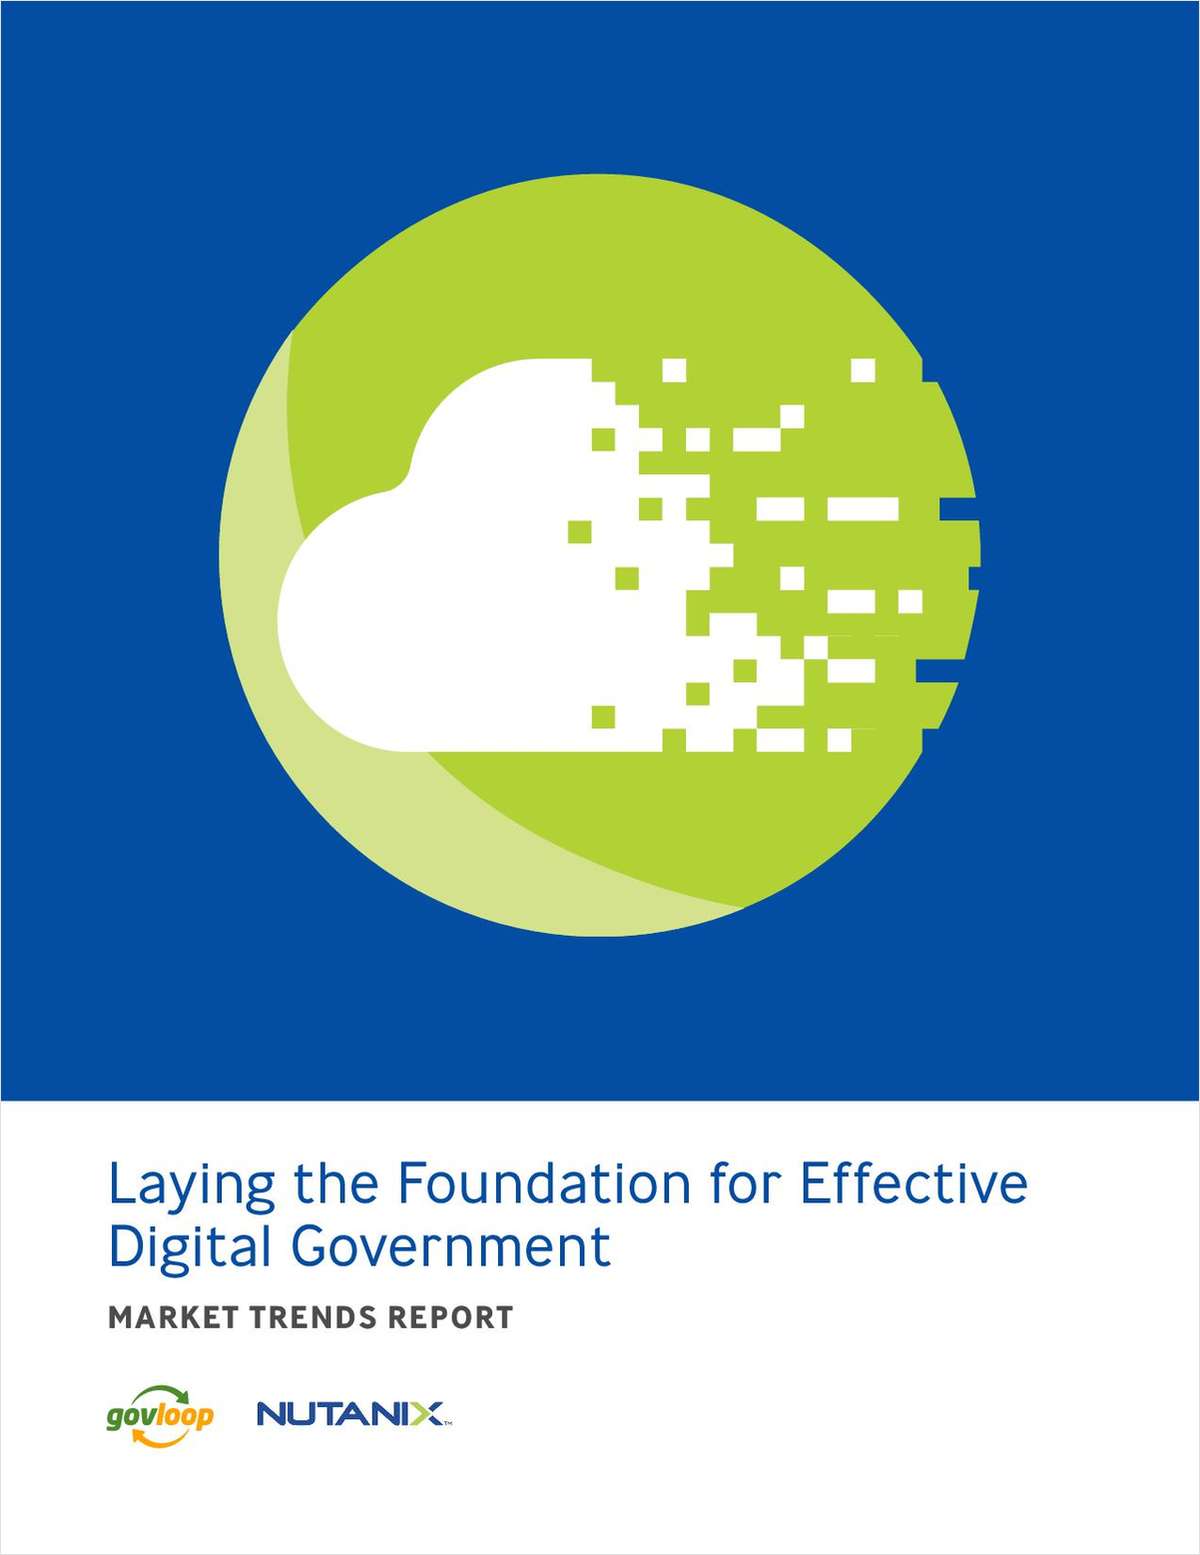 Laying the Foundation for Effective Digital Government